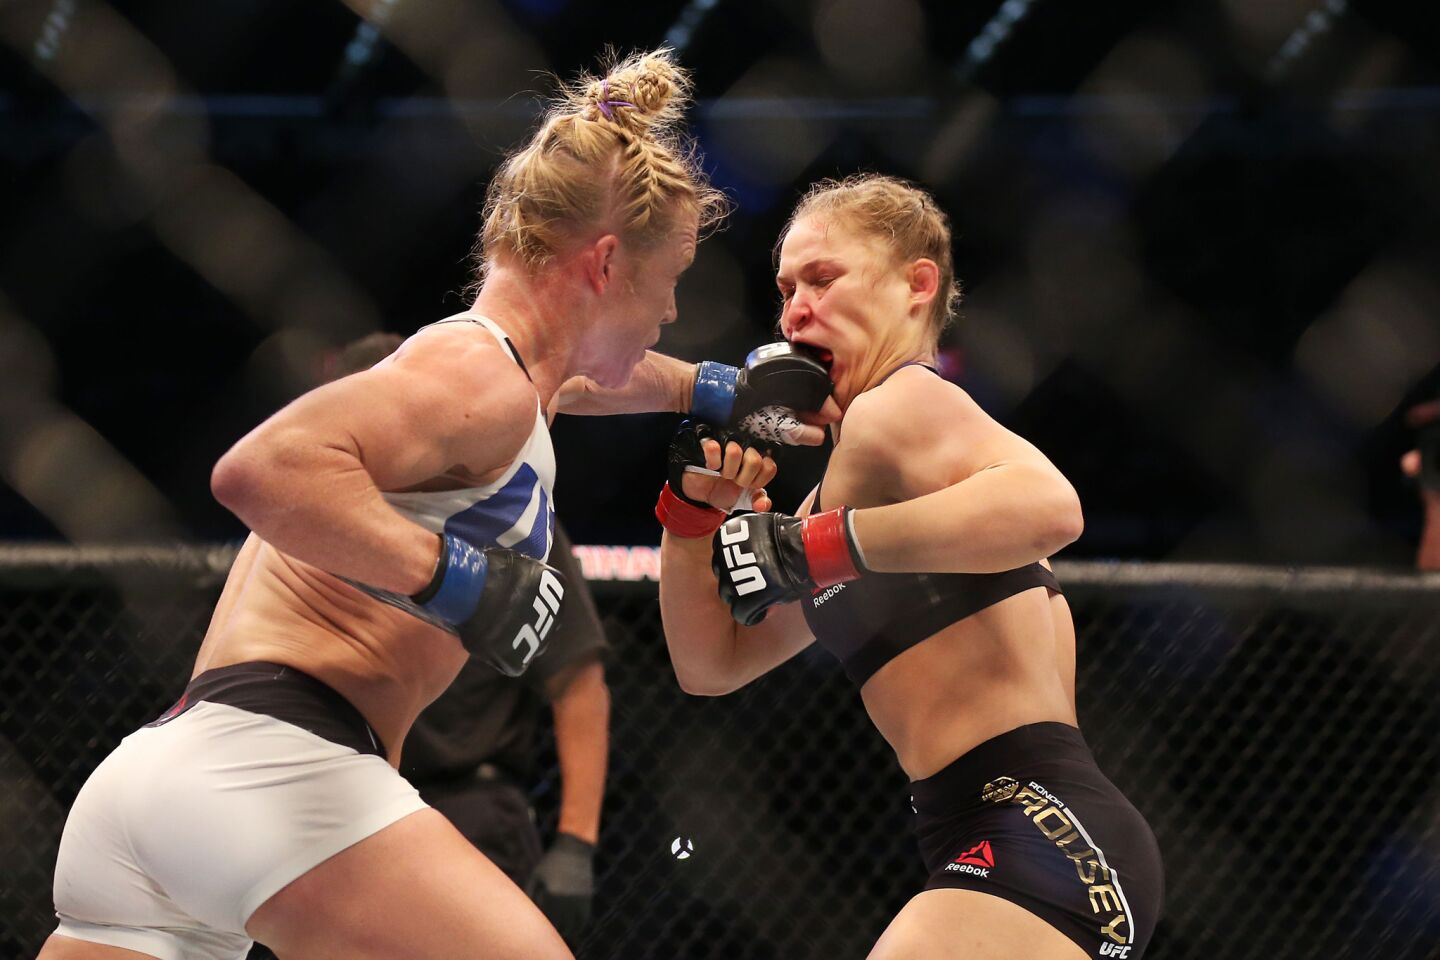 UFC's Dana White says Holly Holm will wait for Ronda Rousey